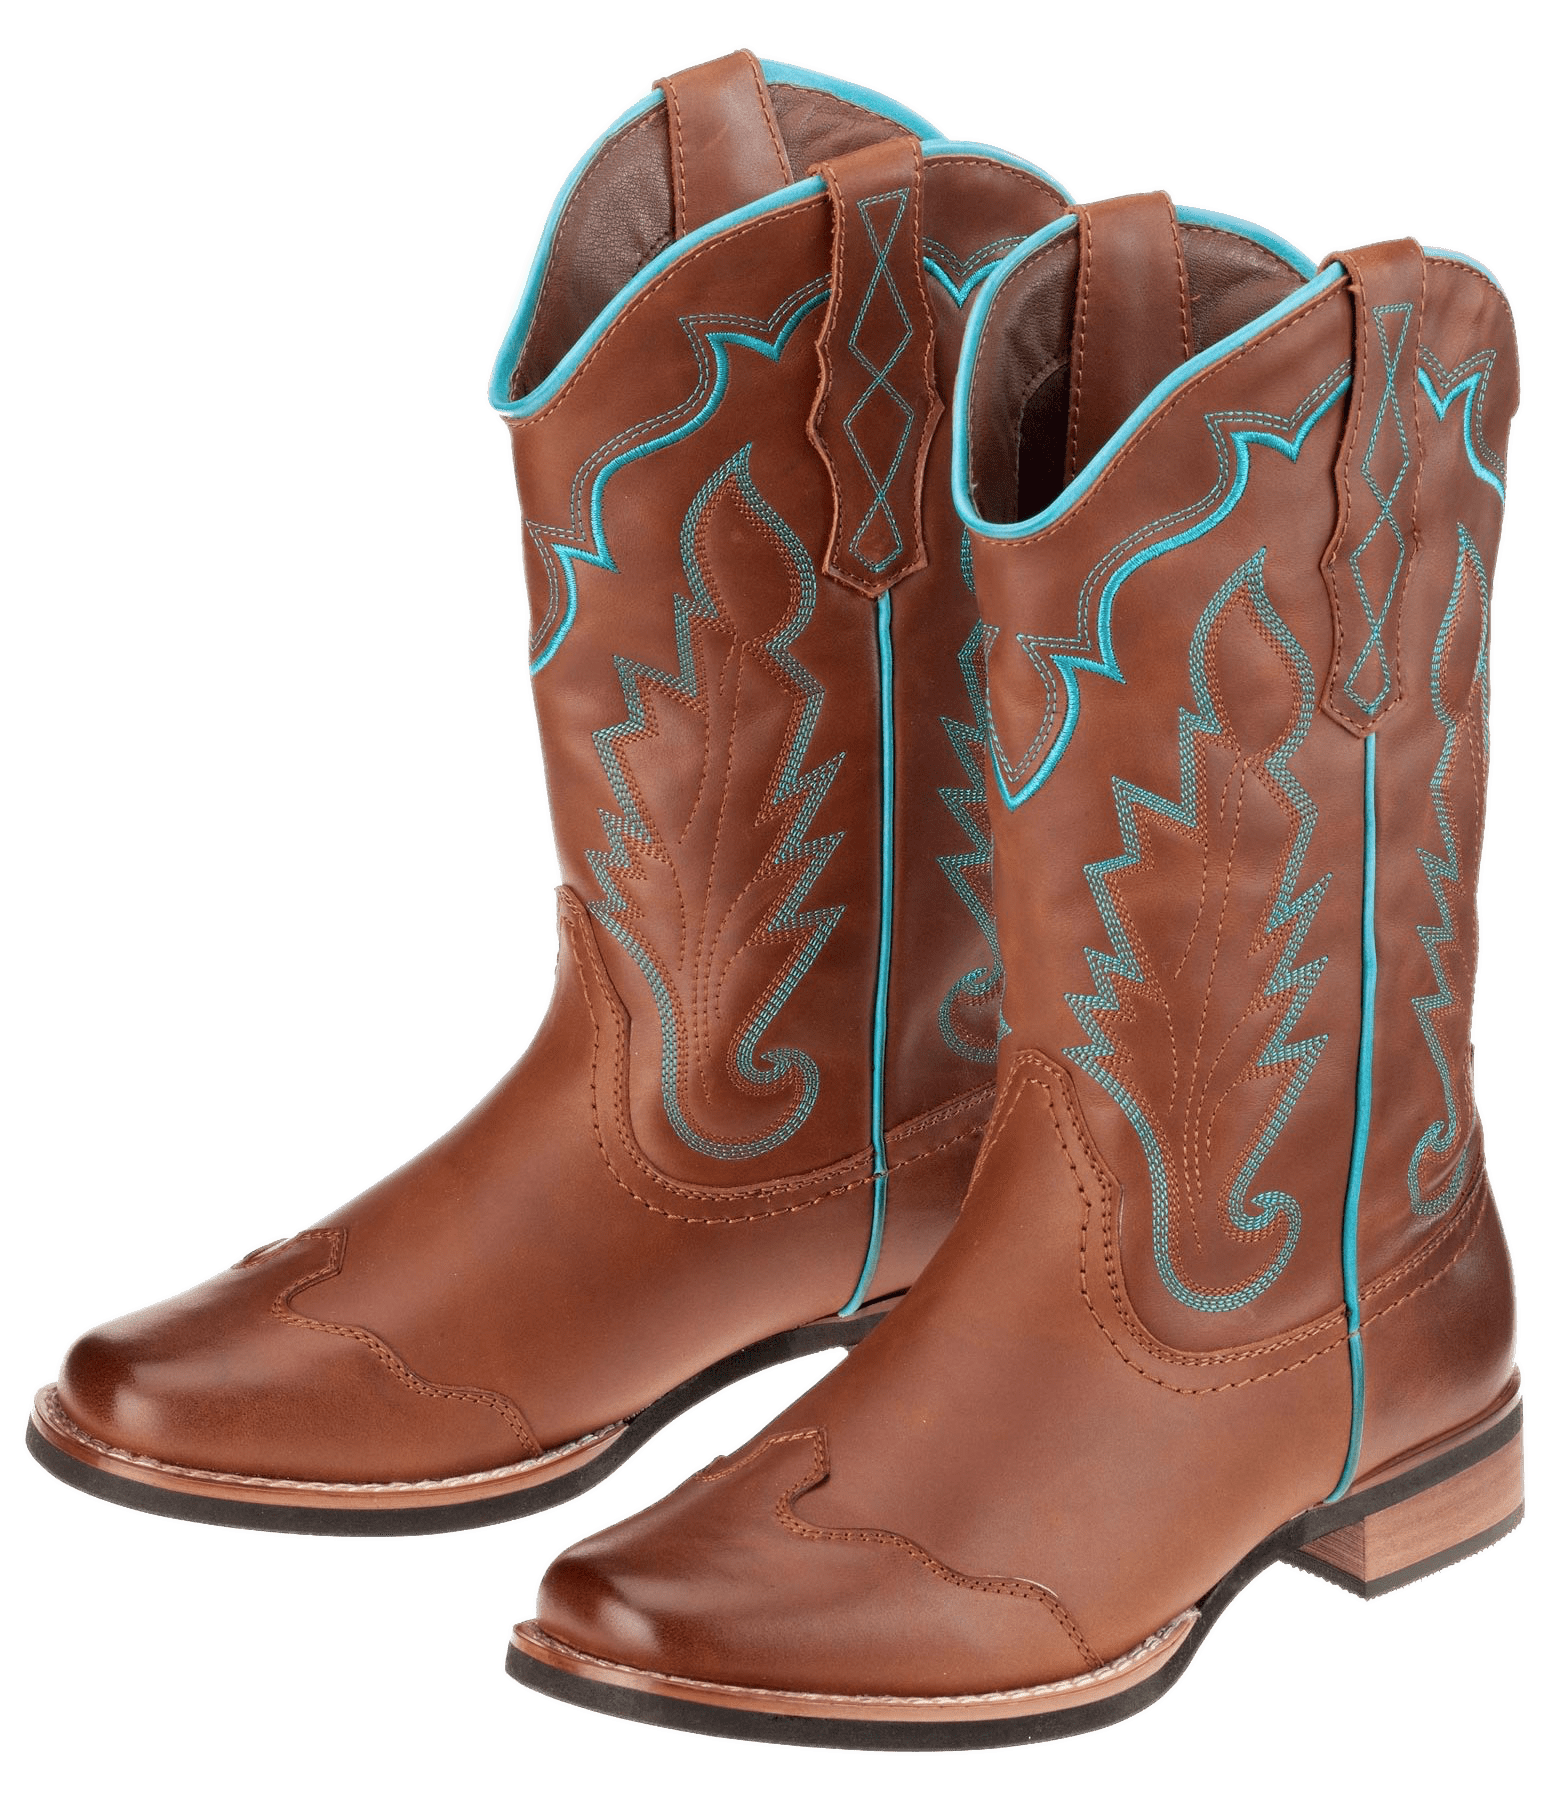 Cowboy Boots PNG Free Download